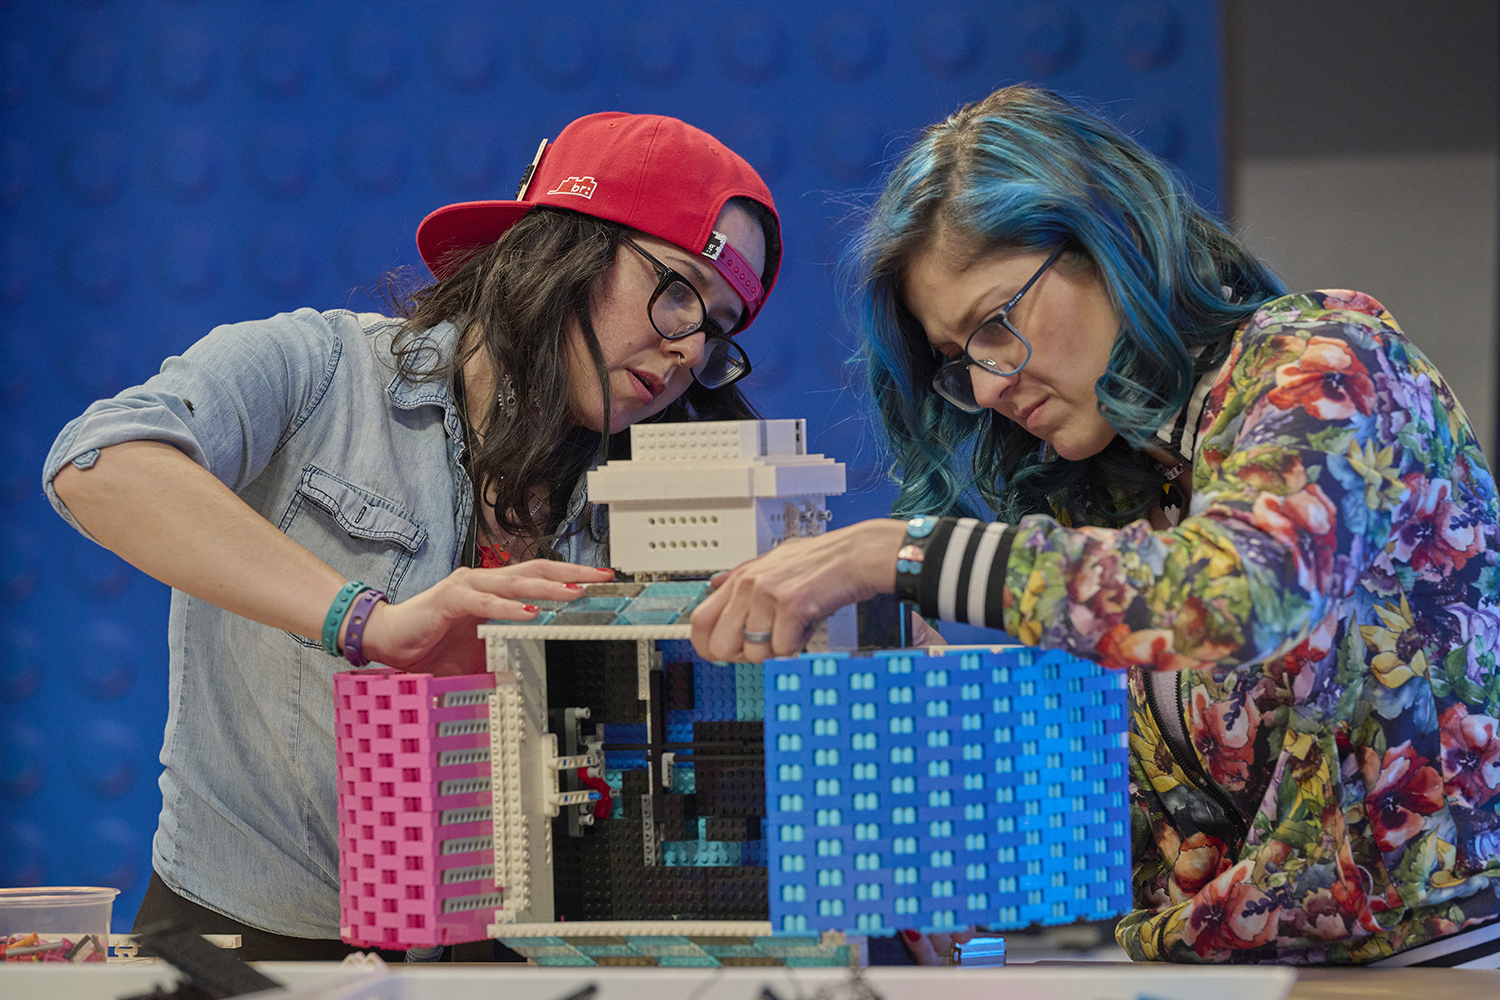 nægte passage Besiddelse New 'LEGO Masters' season features two Latina engineers